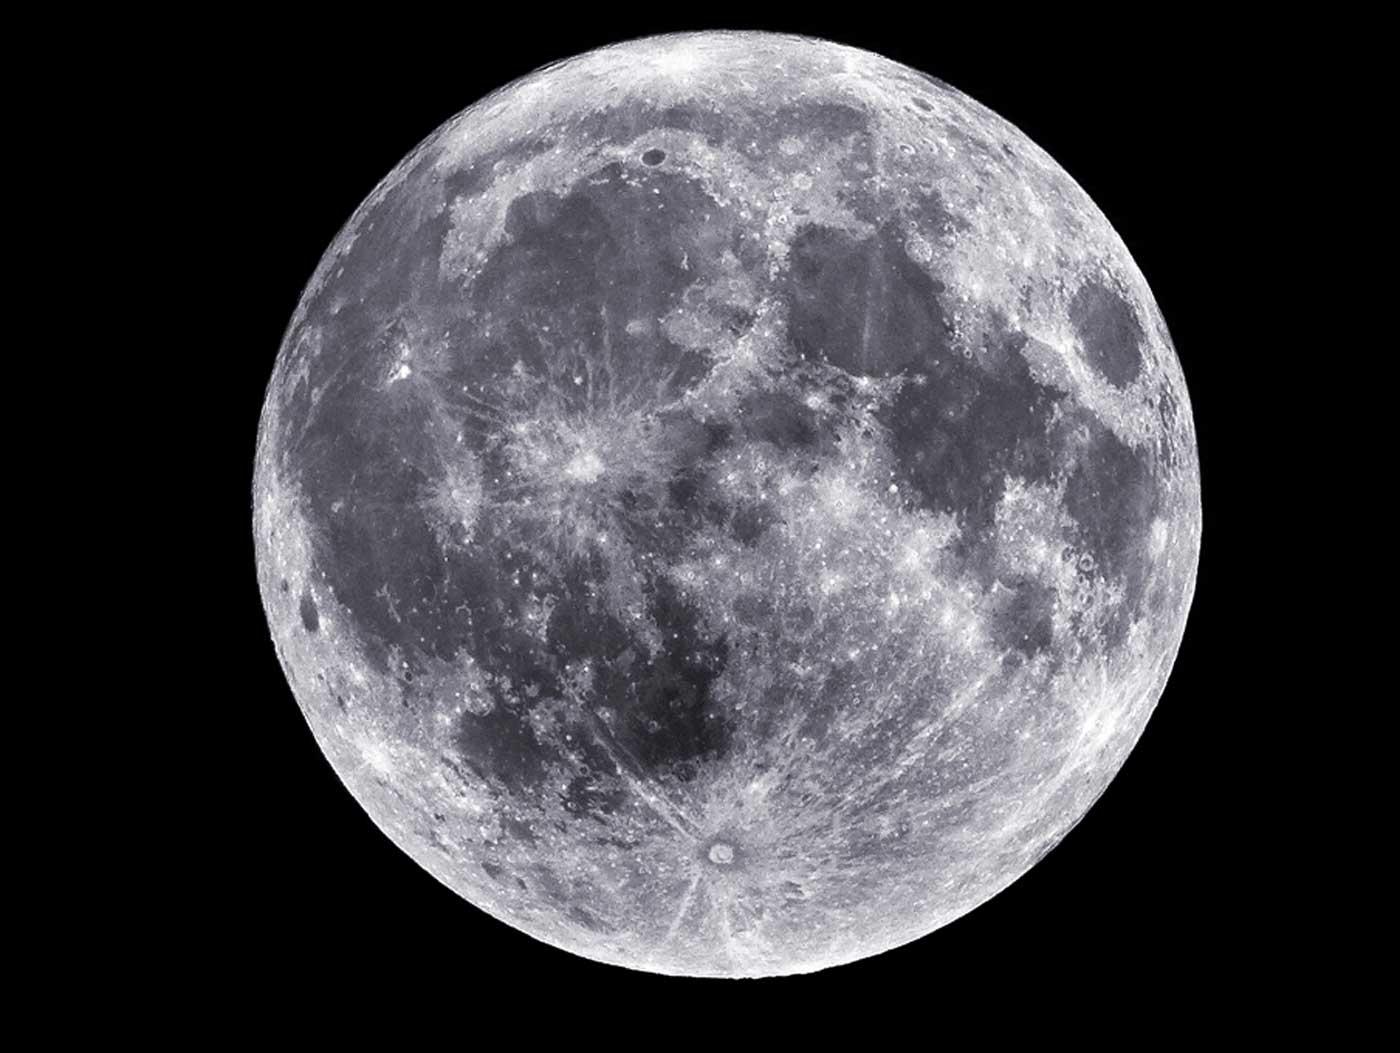 Image of the grey and white Super Moon against a black background